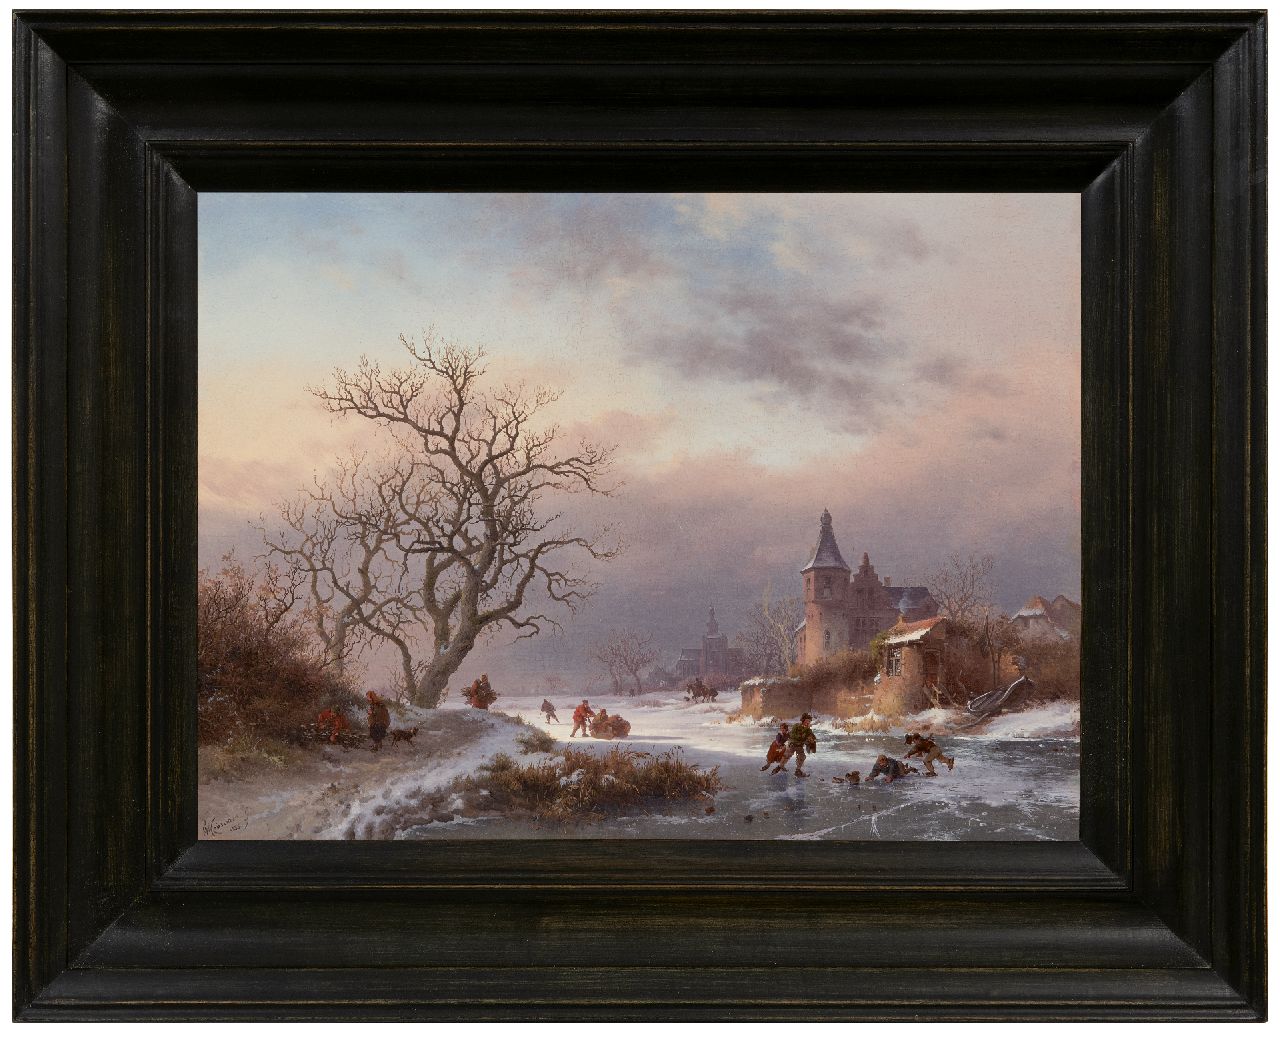 Kruseman F.M.  | Frederik Marinus Kruseman | Paintings offered for sale | A winter landscape with skaters on a frozen river, oil on panel 29.0 x 39.0 cm, signed l.l. and dated 1855